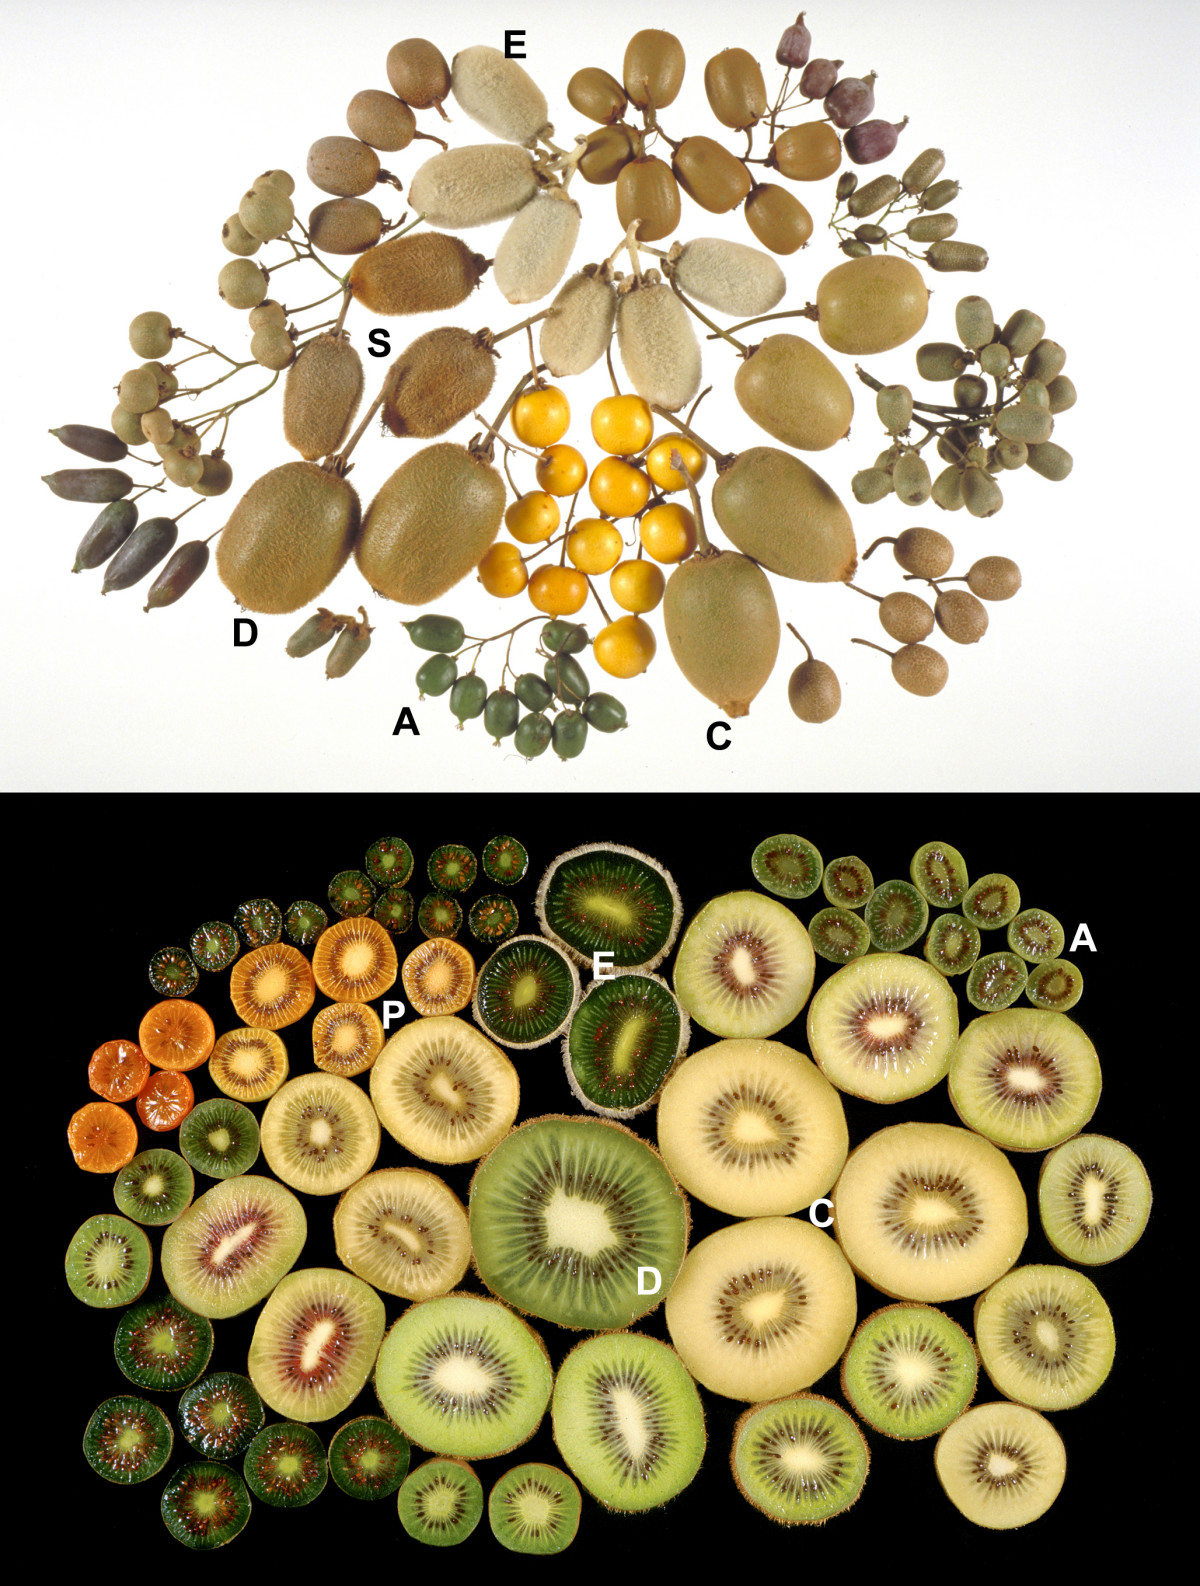 Fruits of different species af Actinidia.